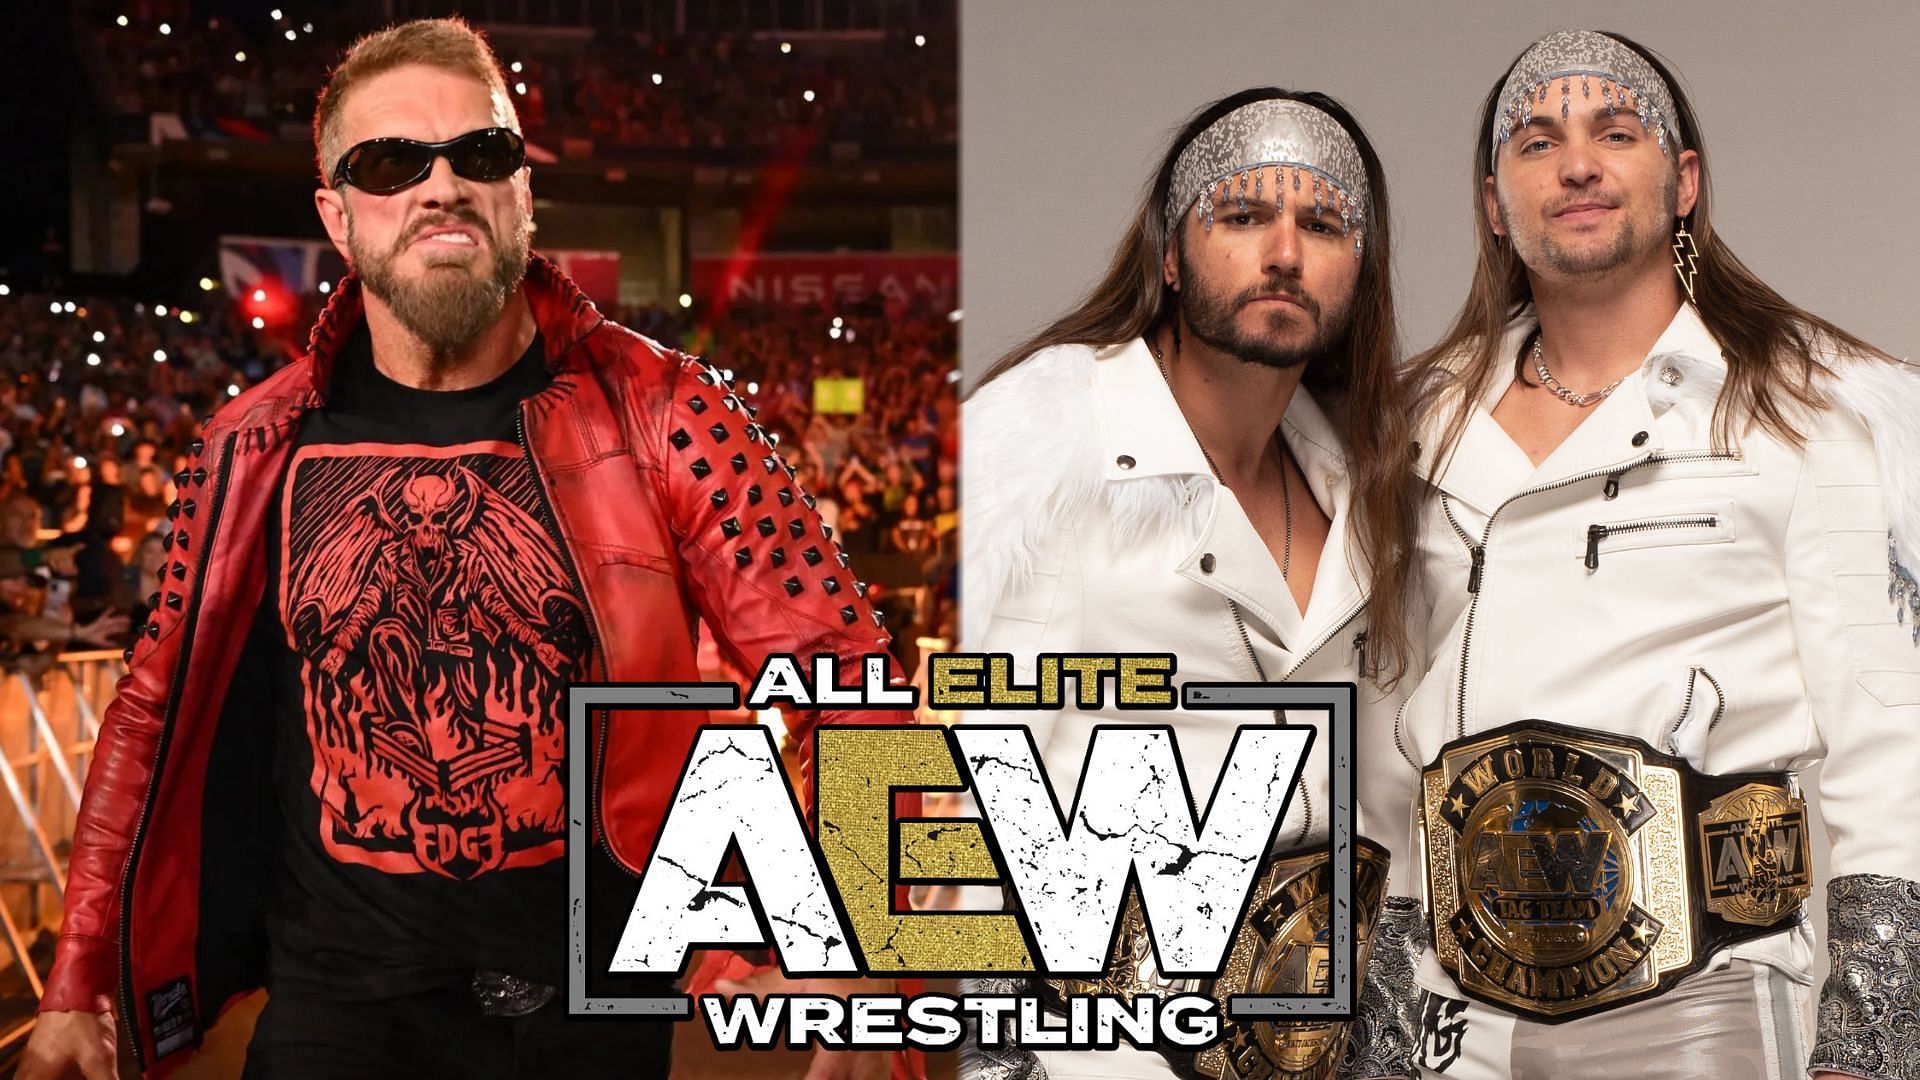 Would these stars have debuted in AEW without Edge?